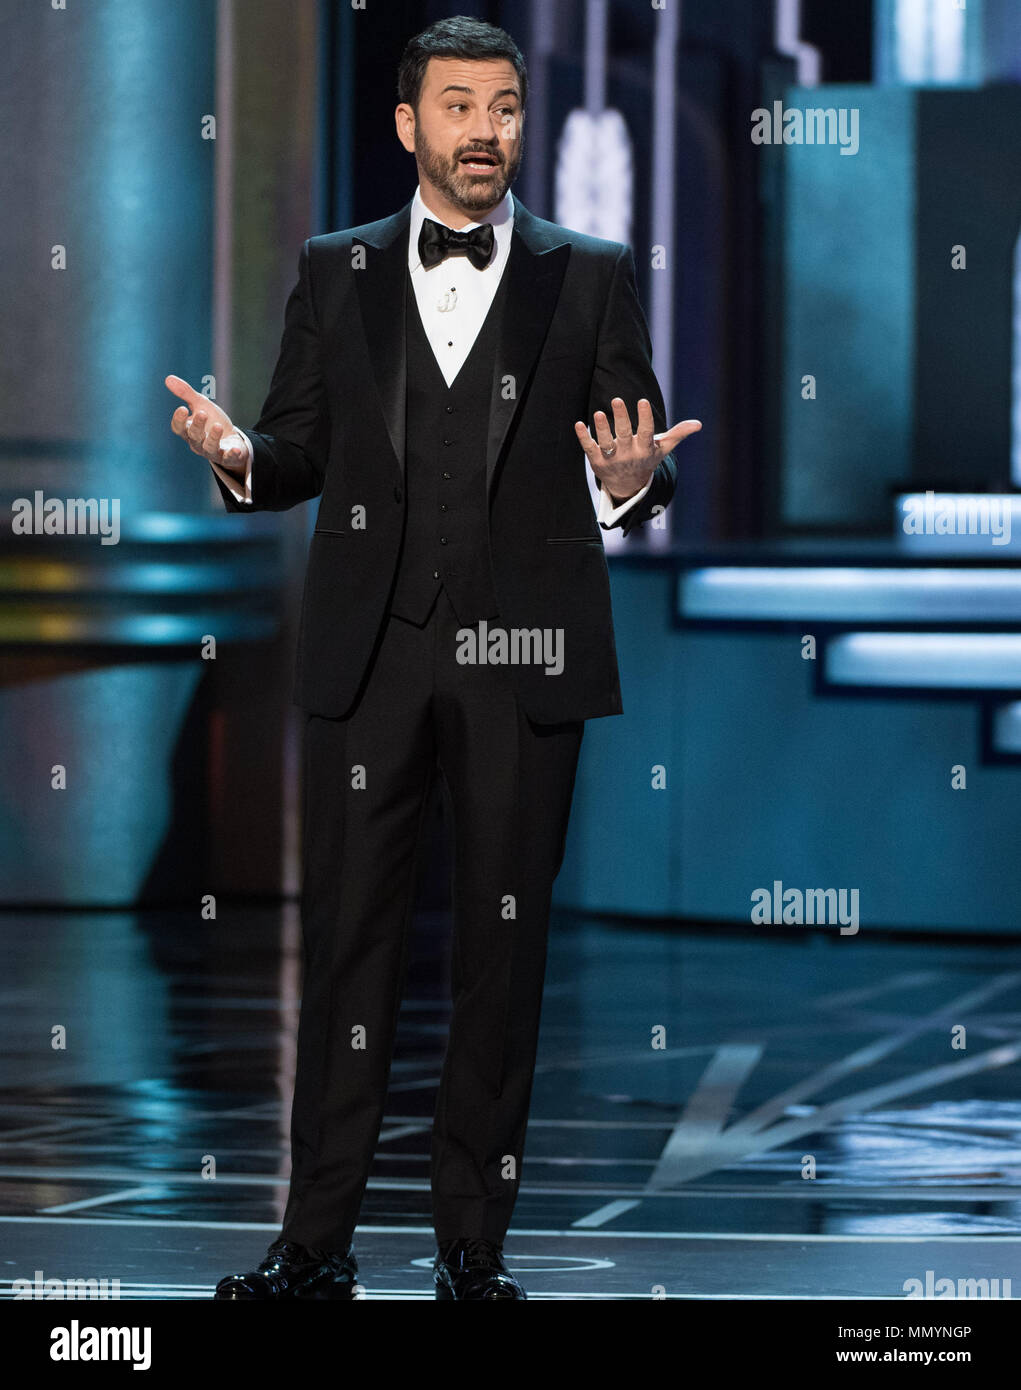 HOLLYWOOD, CA - FEBRUARY 26: Jimmy Kimmel performs onstage during the 89th Annual Academy Awards at Hollywood & Highland Center on February 26, 2017 in Hollywood, California  People:  Jimmy Kimmel Stock Photo